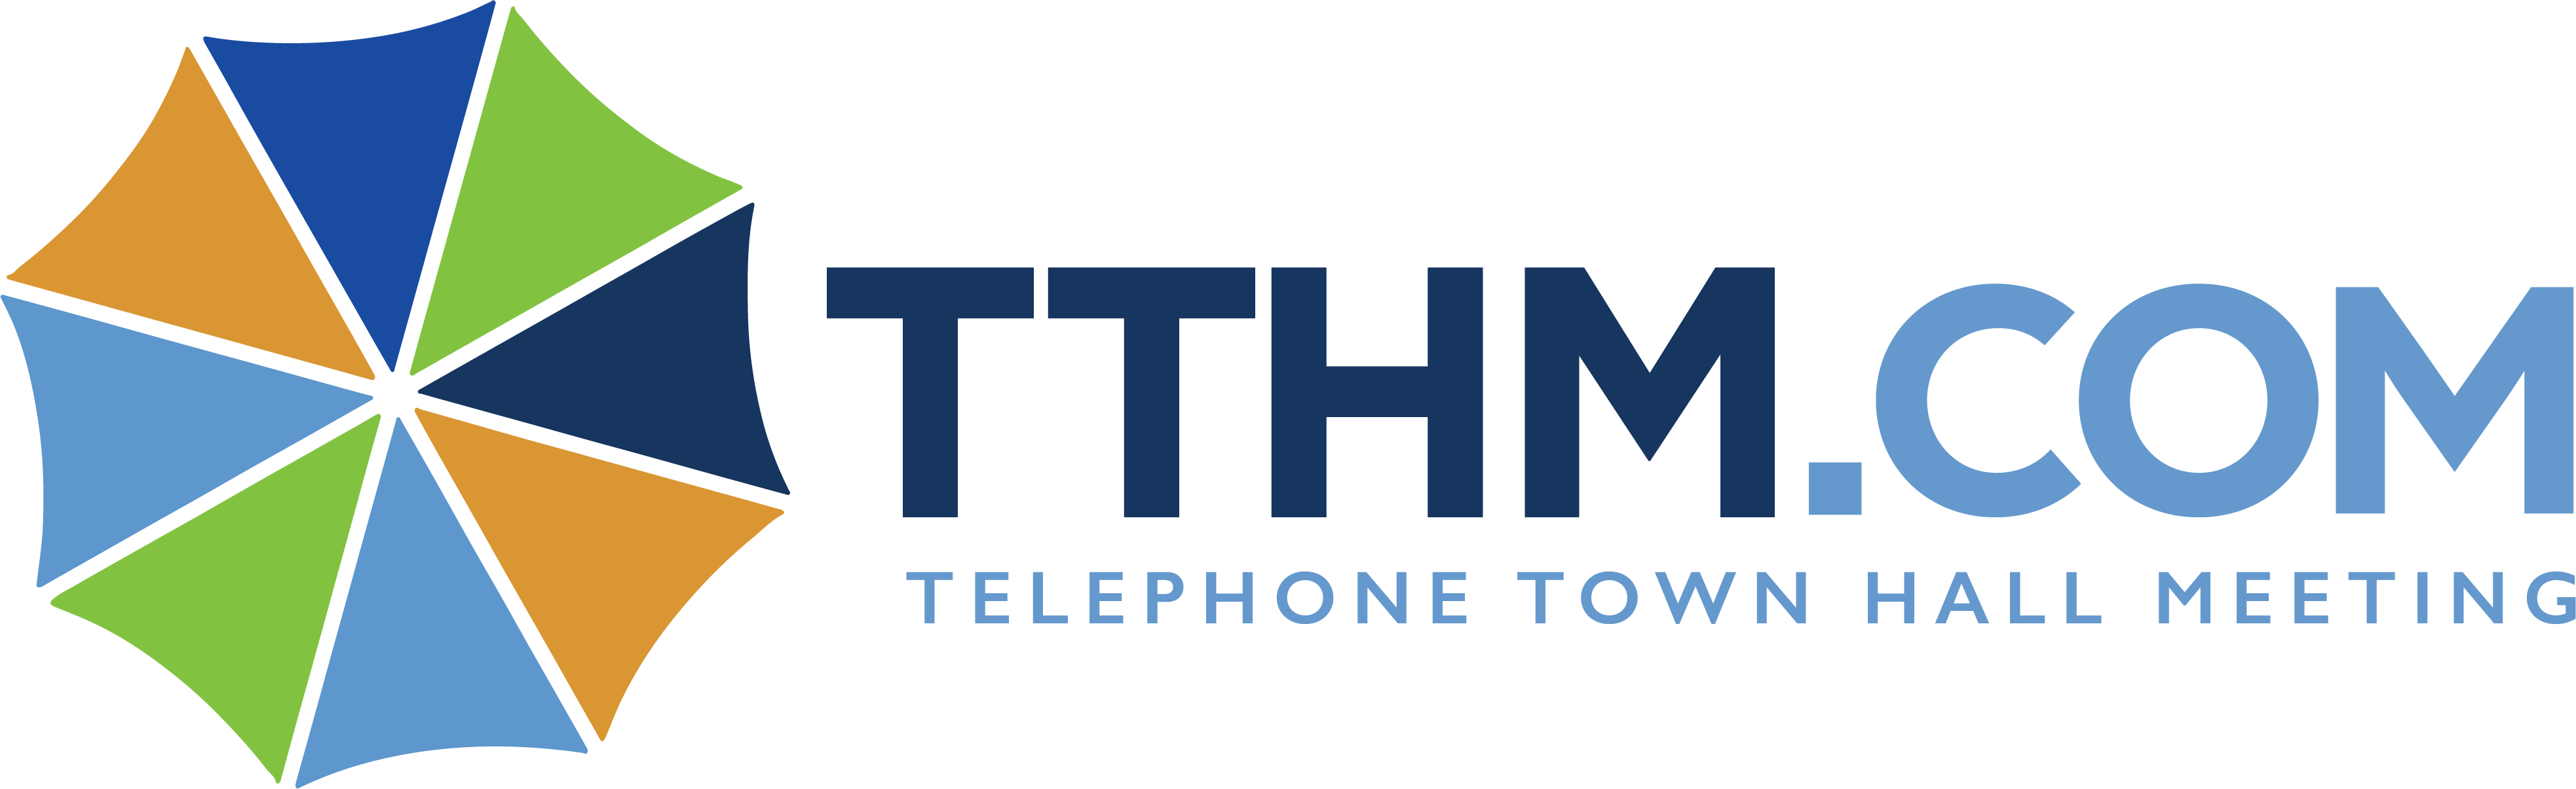 Telephone Town Hall Meeting